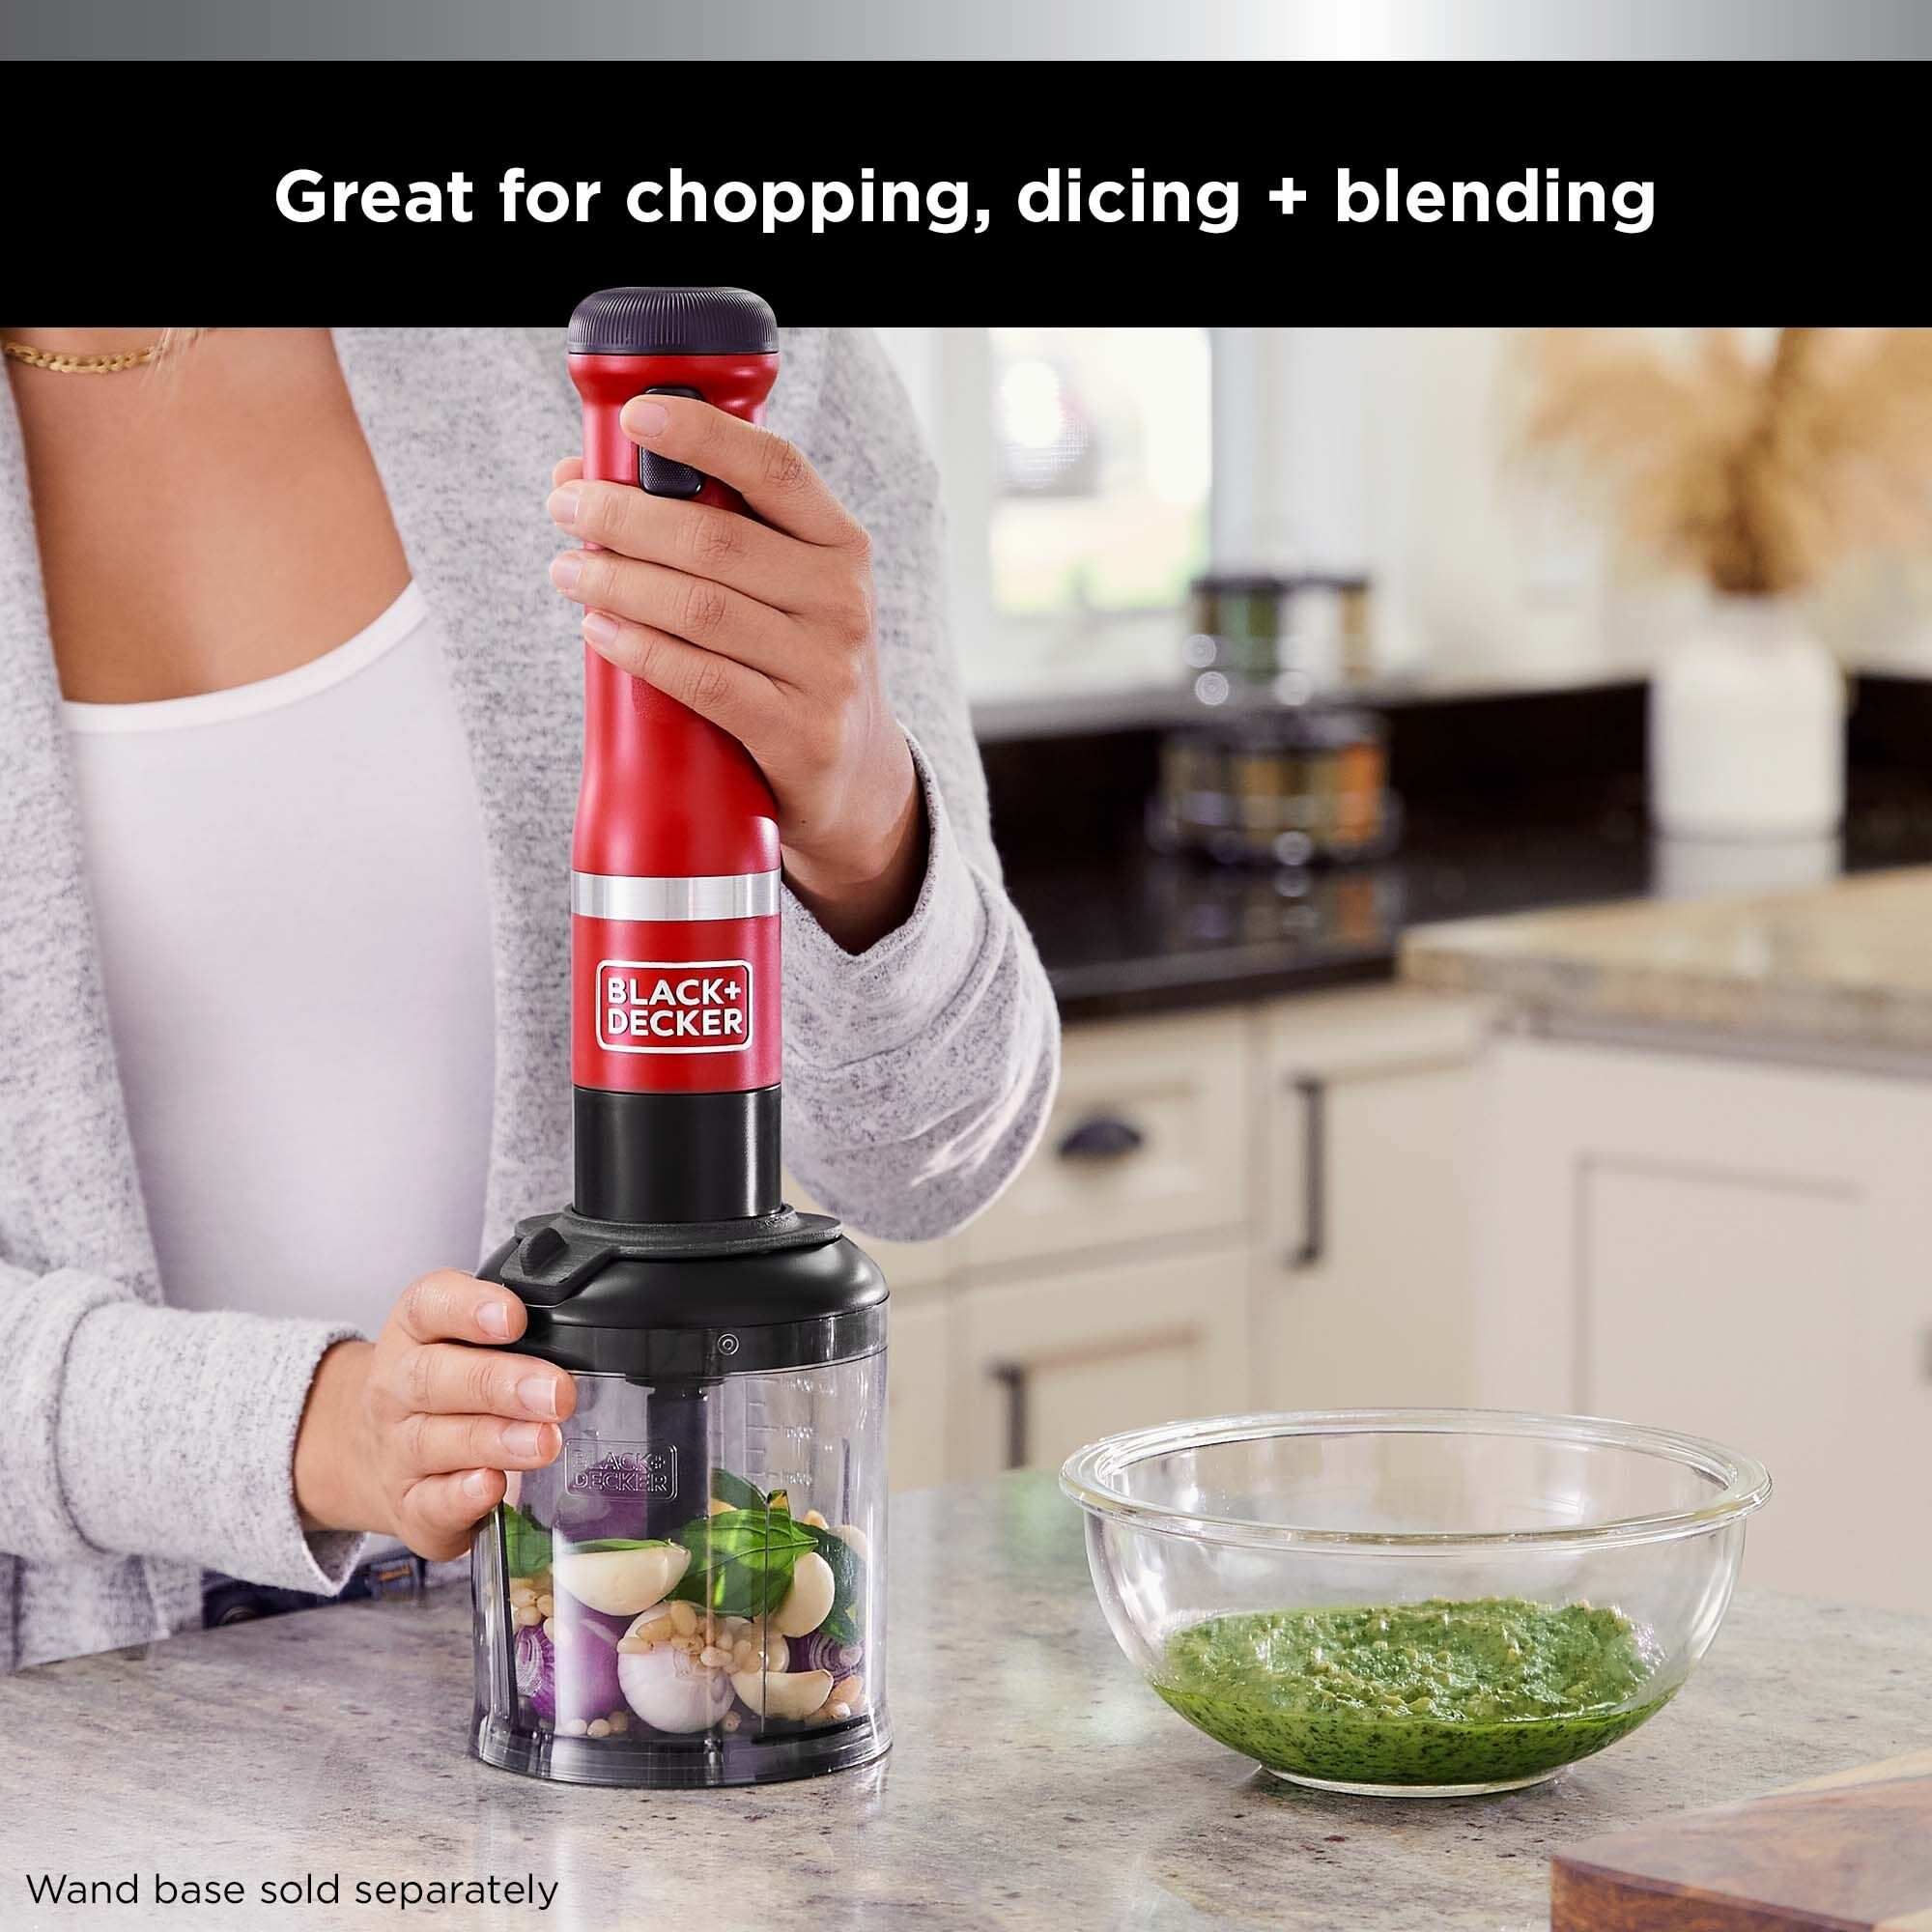 Talent using the liquid port to easily add liquid into the bowl while using the BLACK+DECKER kitchen wand™ food chopper attachment